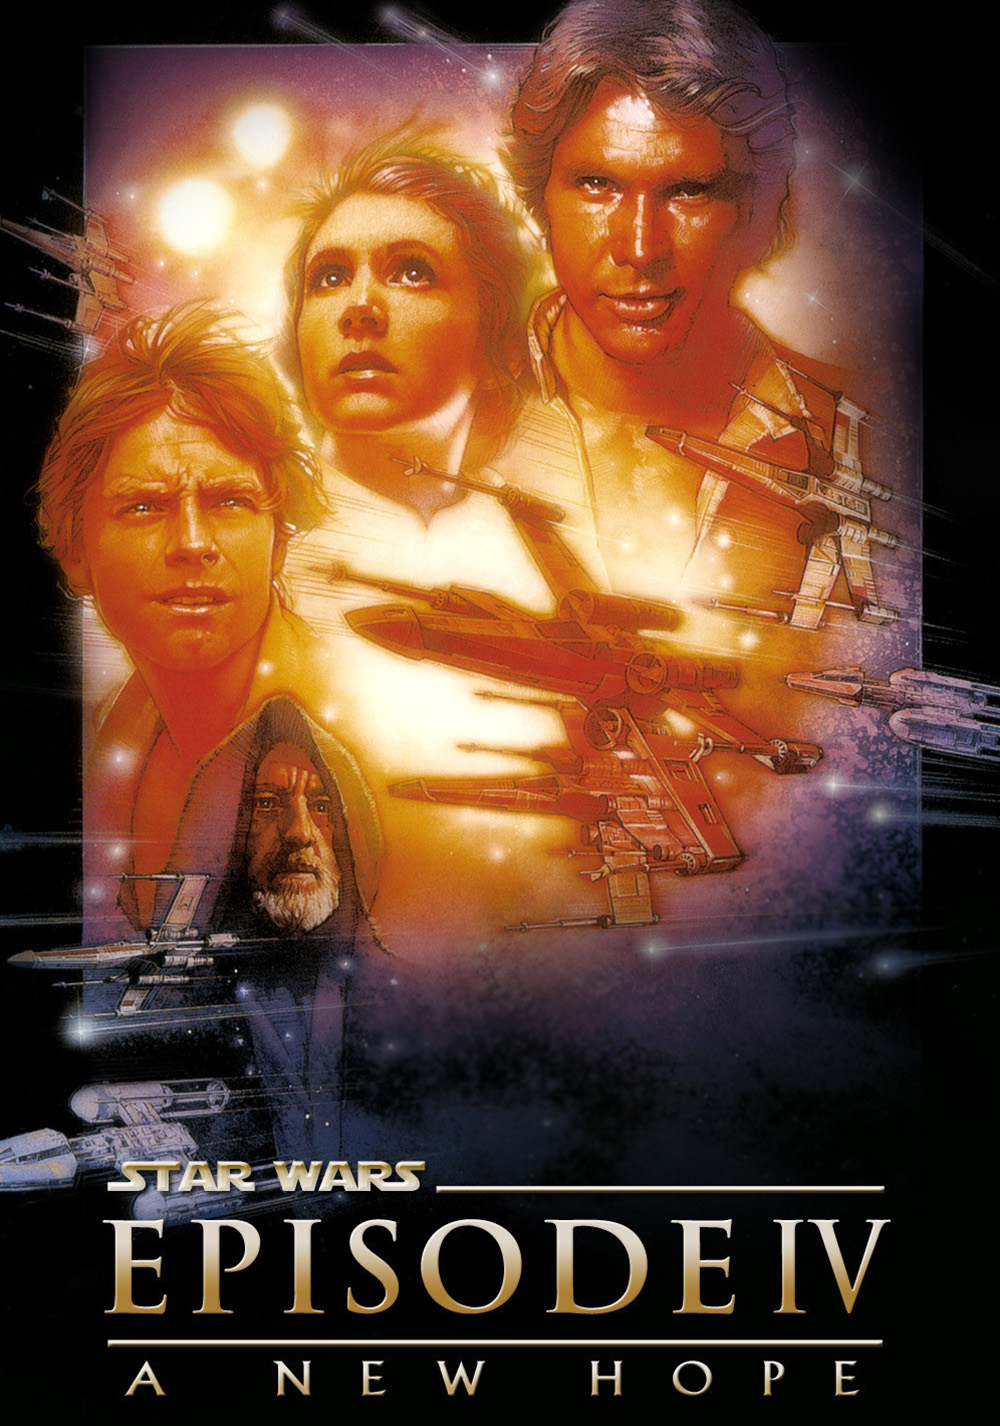 Star Wars A New Hope Poster Star Wars Episode Iv A New Hope Movie